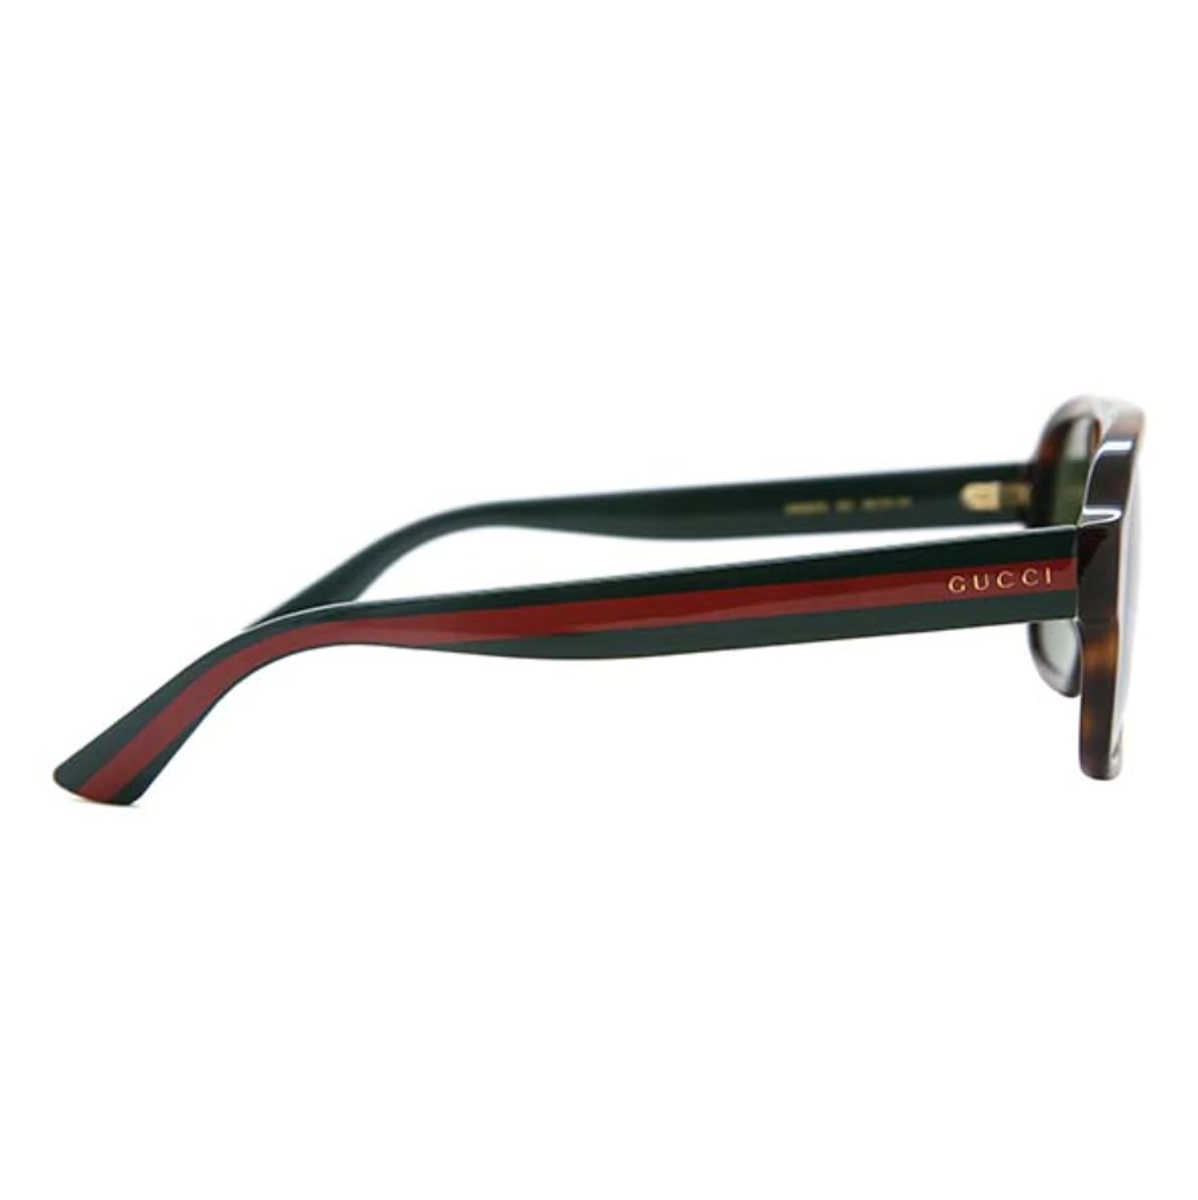 "Premium Gucci Eyewear - Model 0925 sunglasses offering fashion and UV protection."